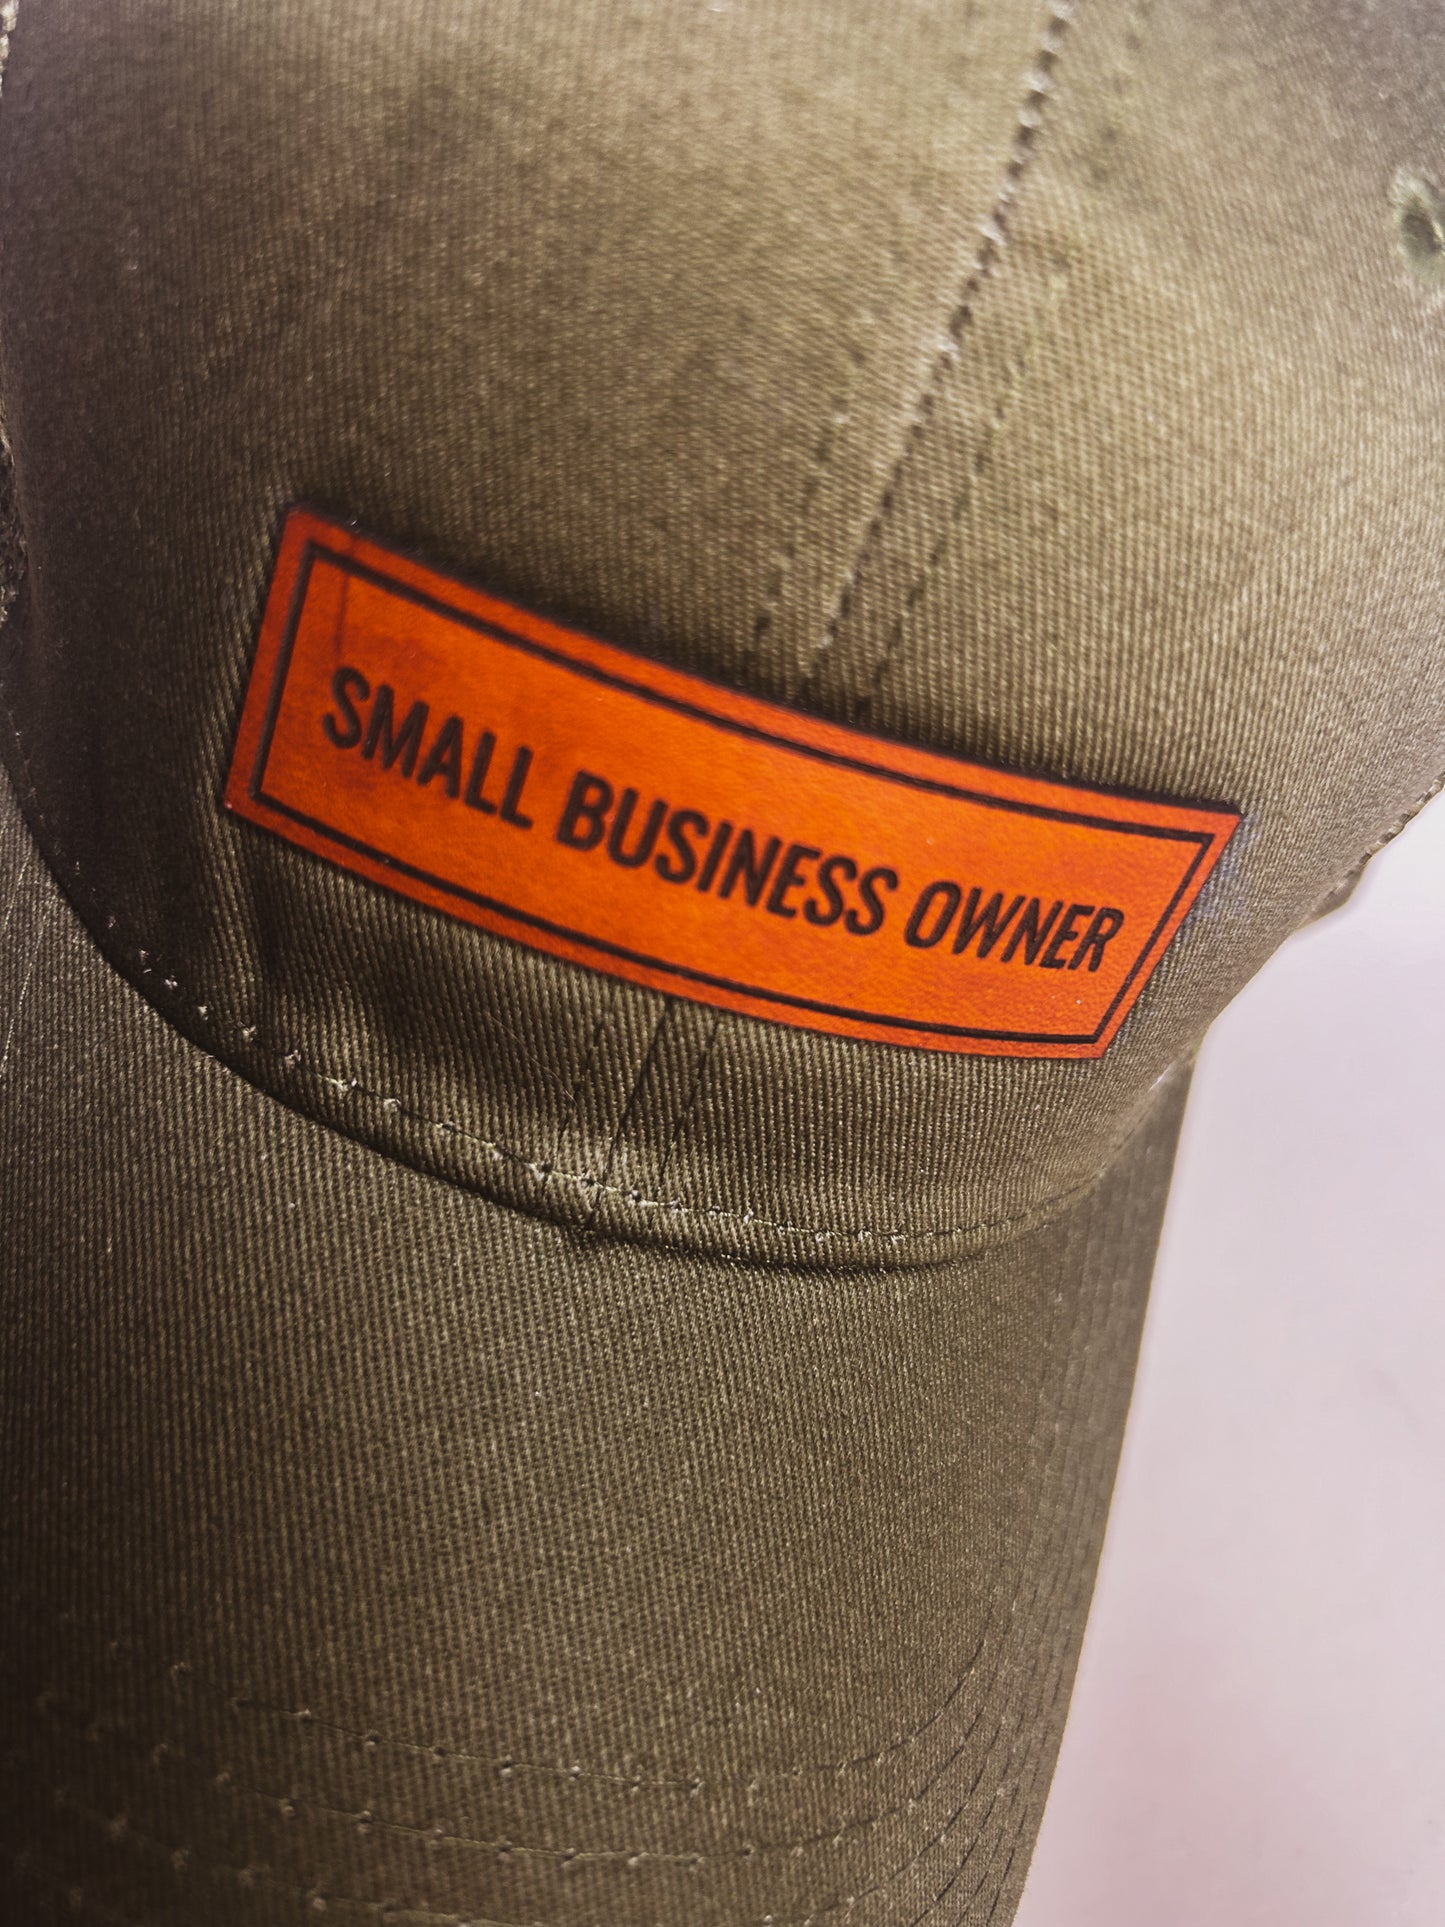 Small Business Owner Leather Patch Hat